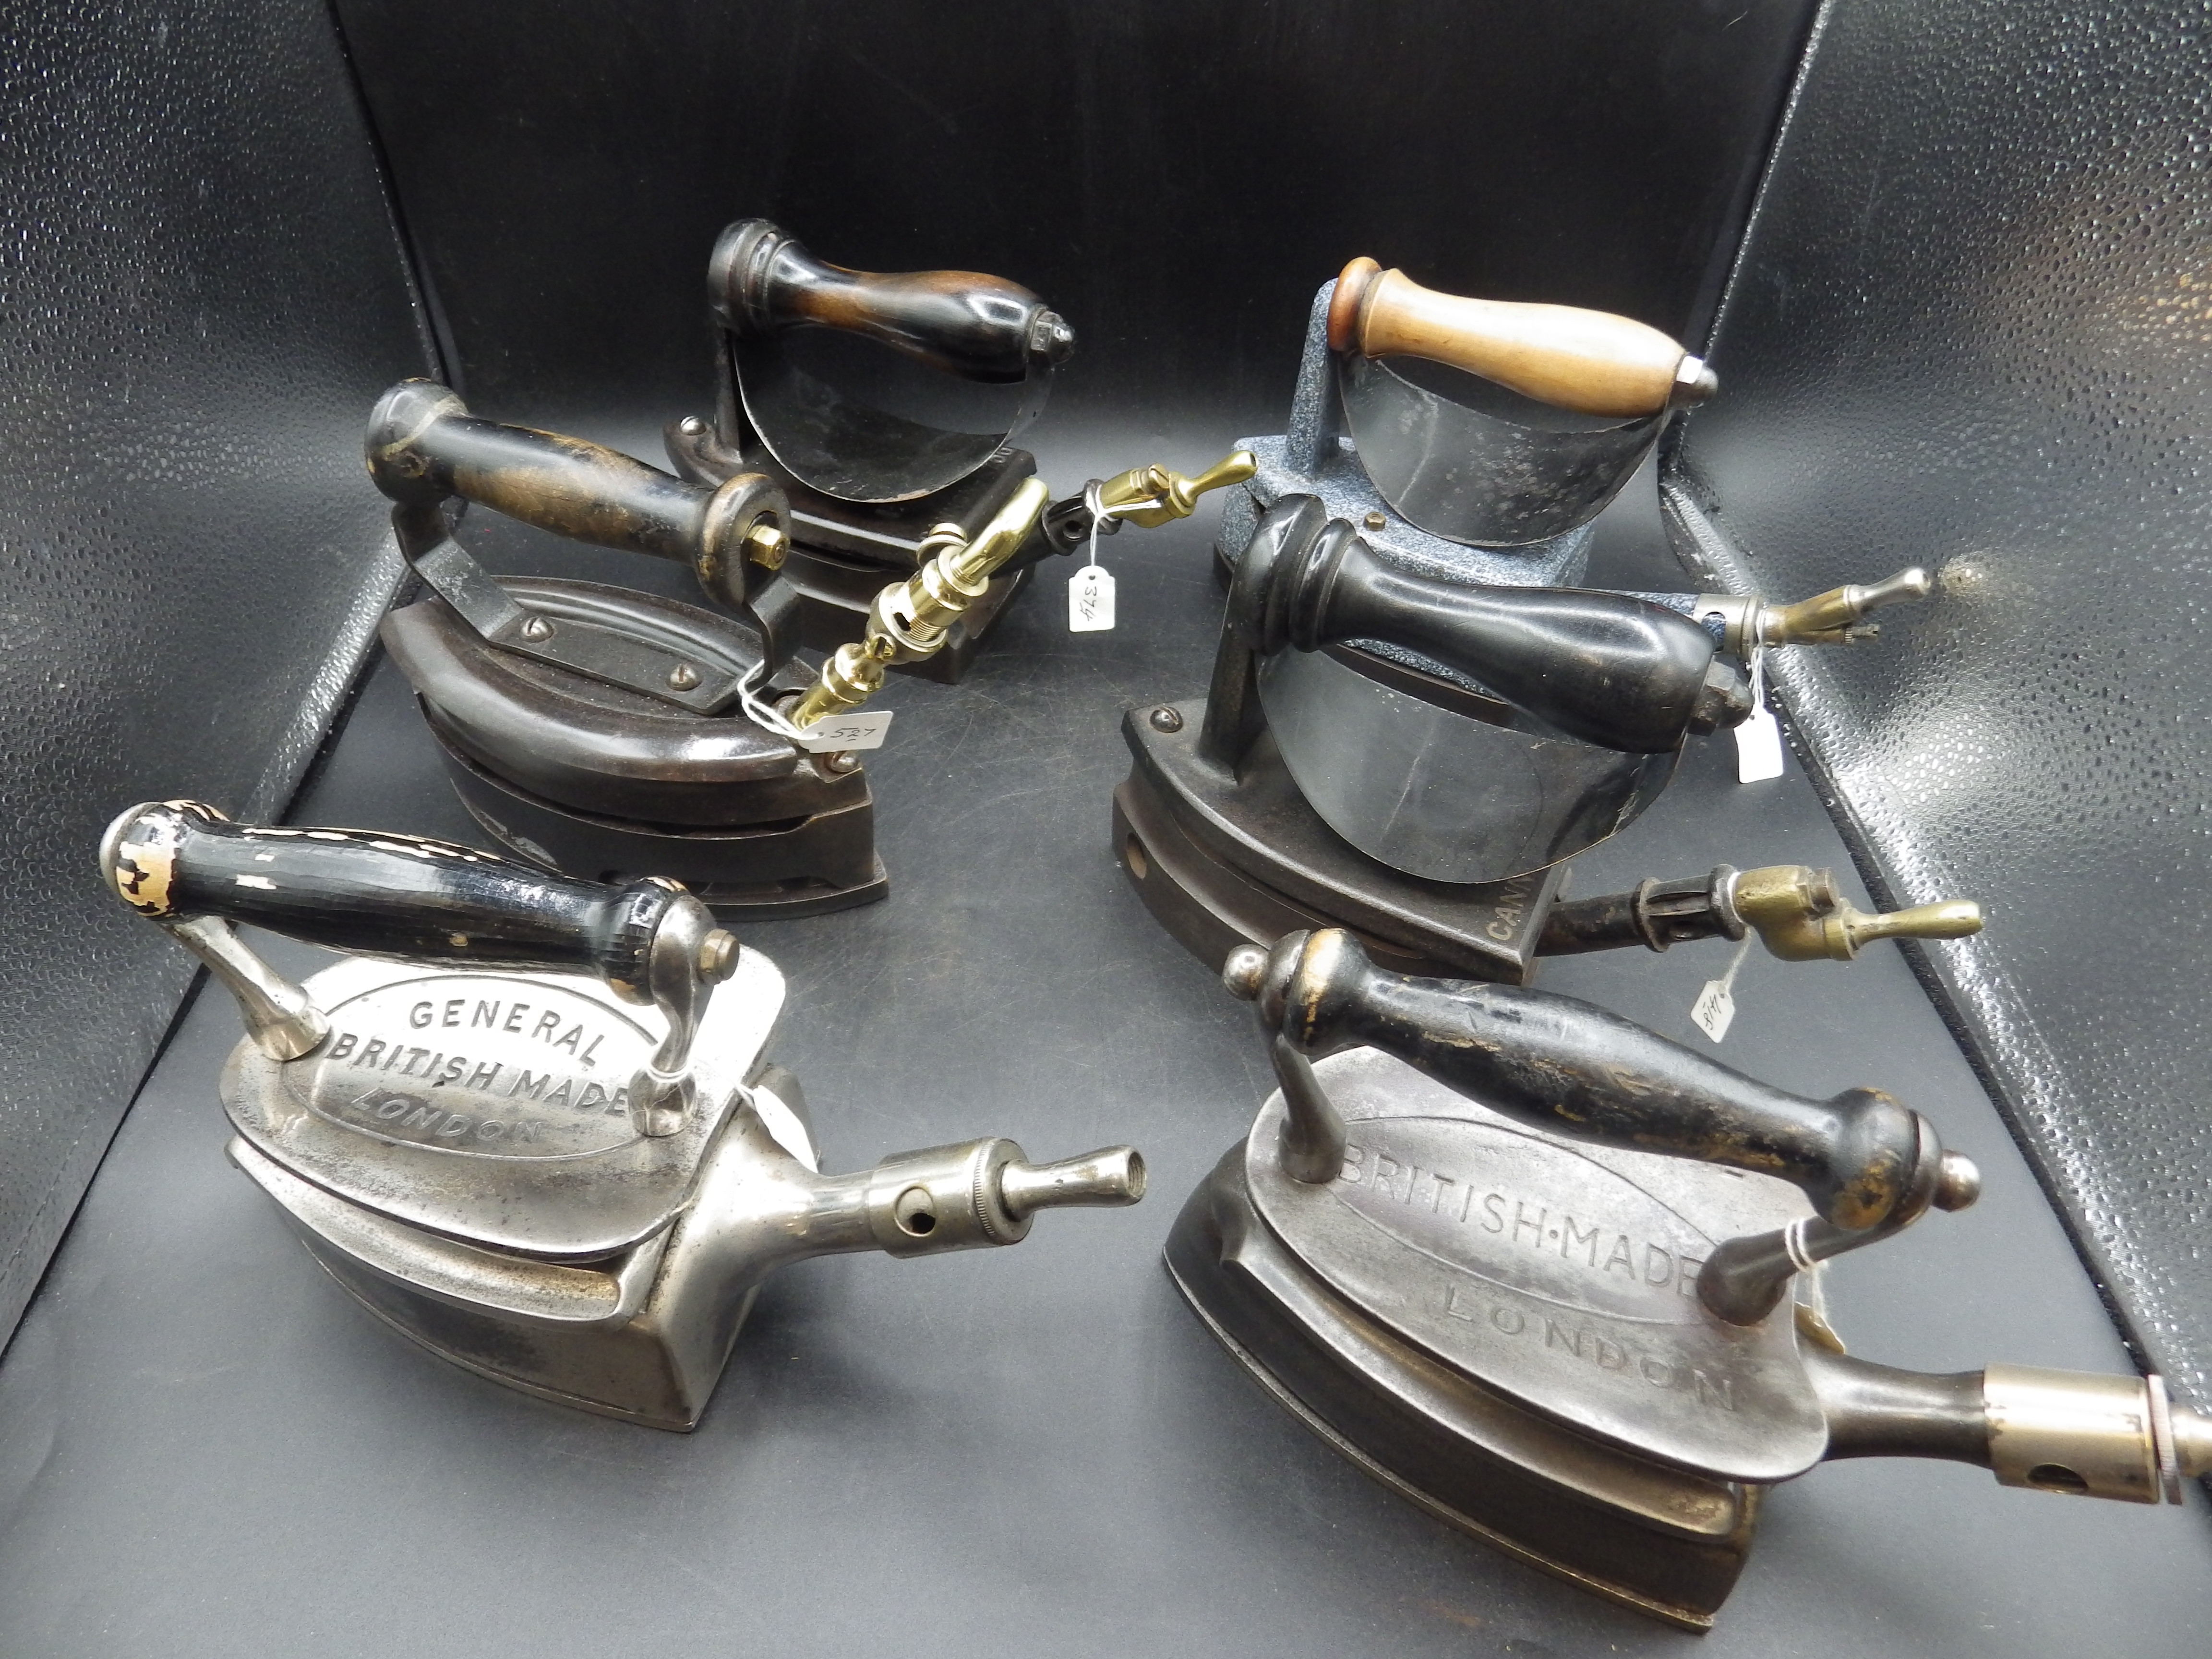 3 General gas irons - two marked British Made London, the third described as below stairs by